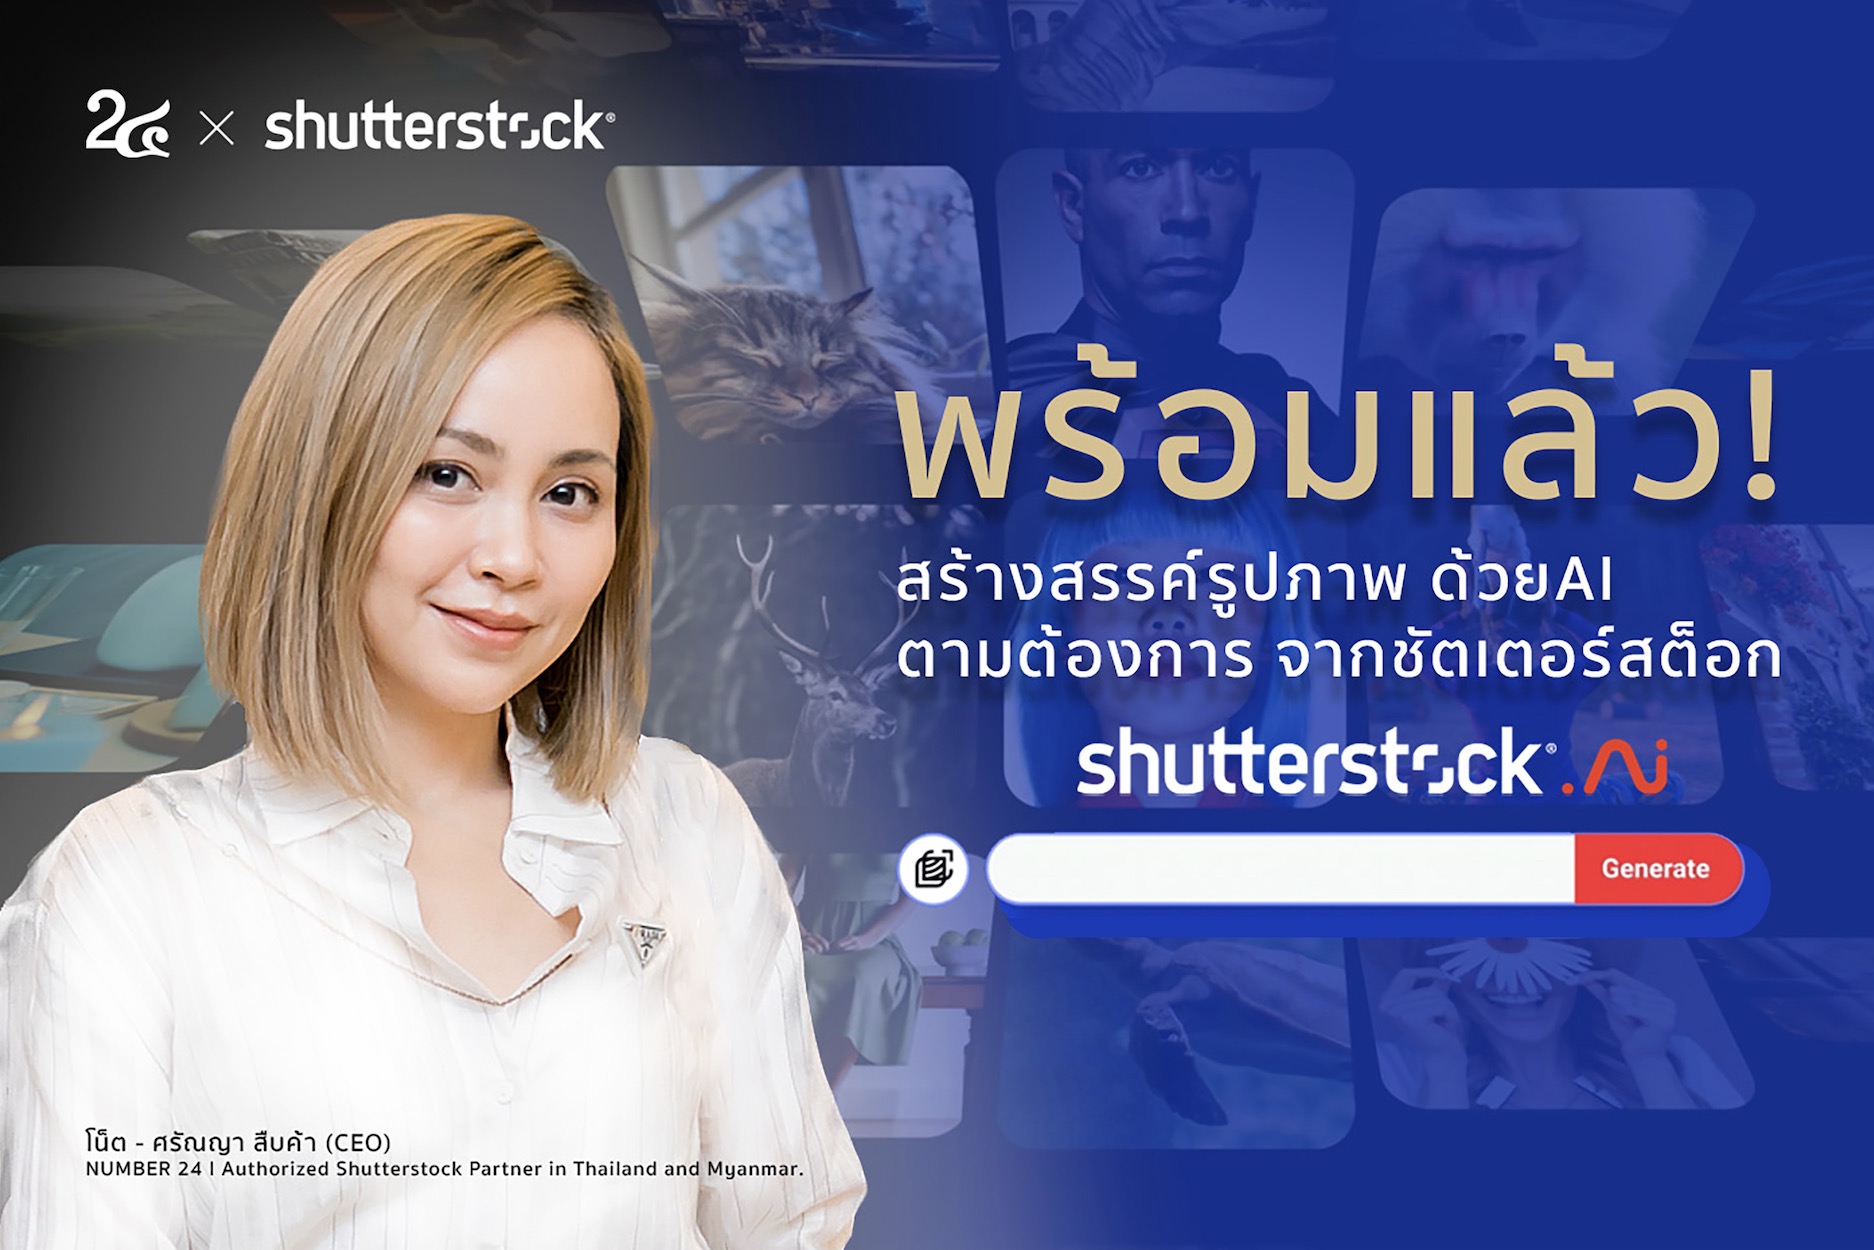 Web design and development for Shutterstock Thailand x Number 24